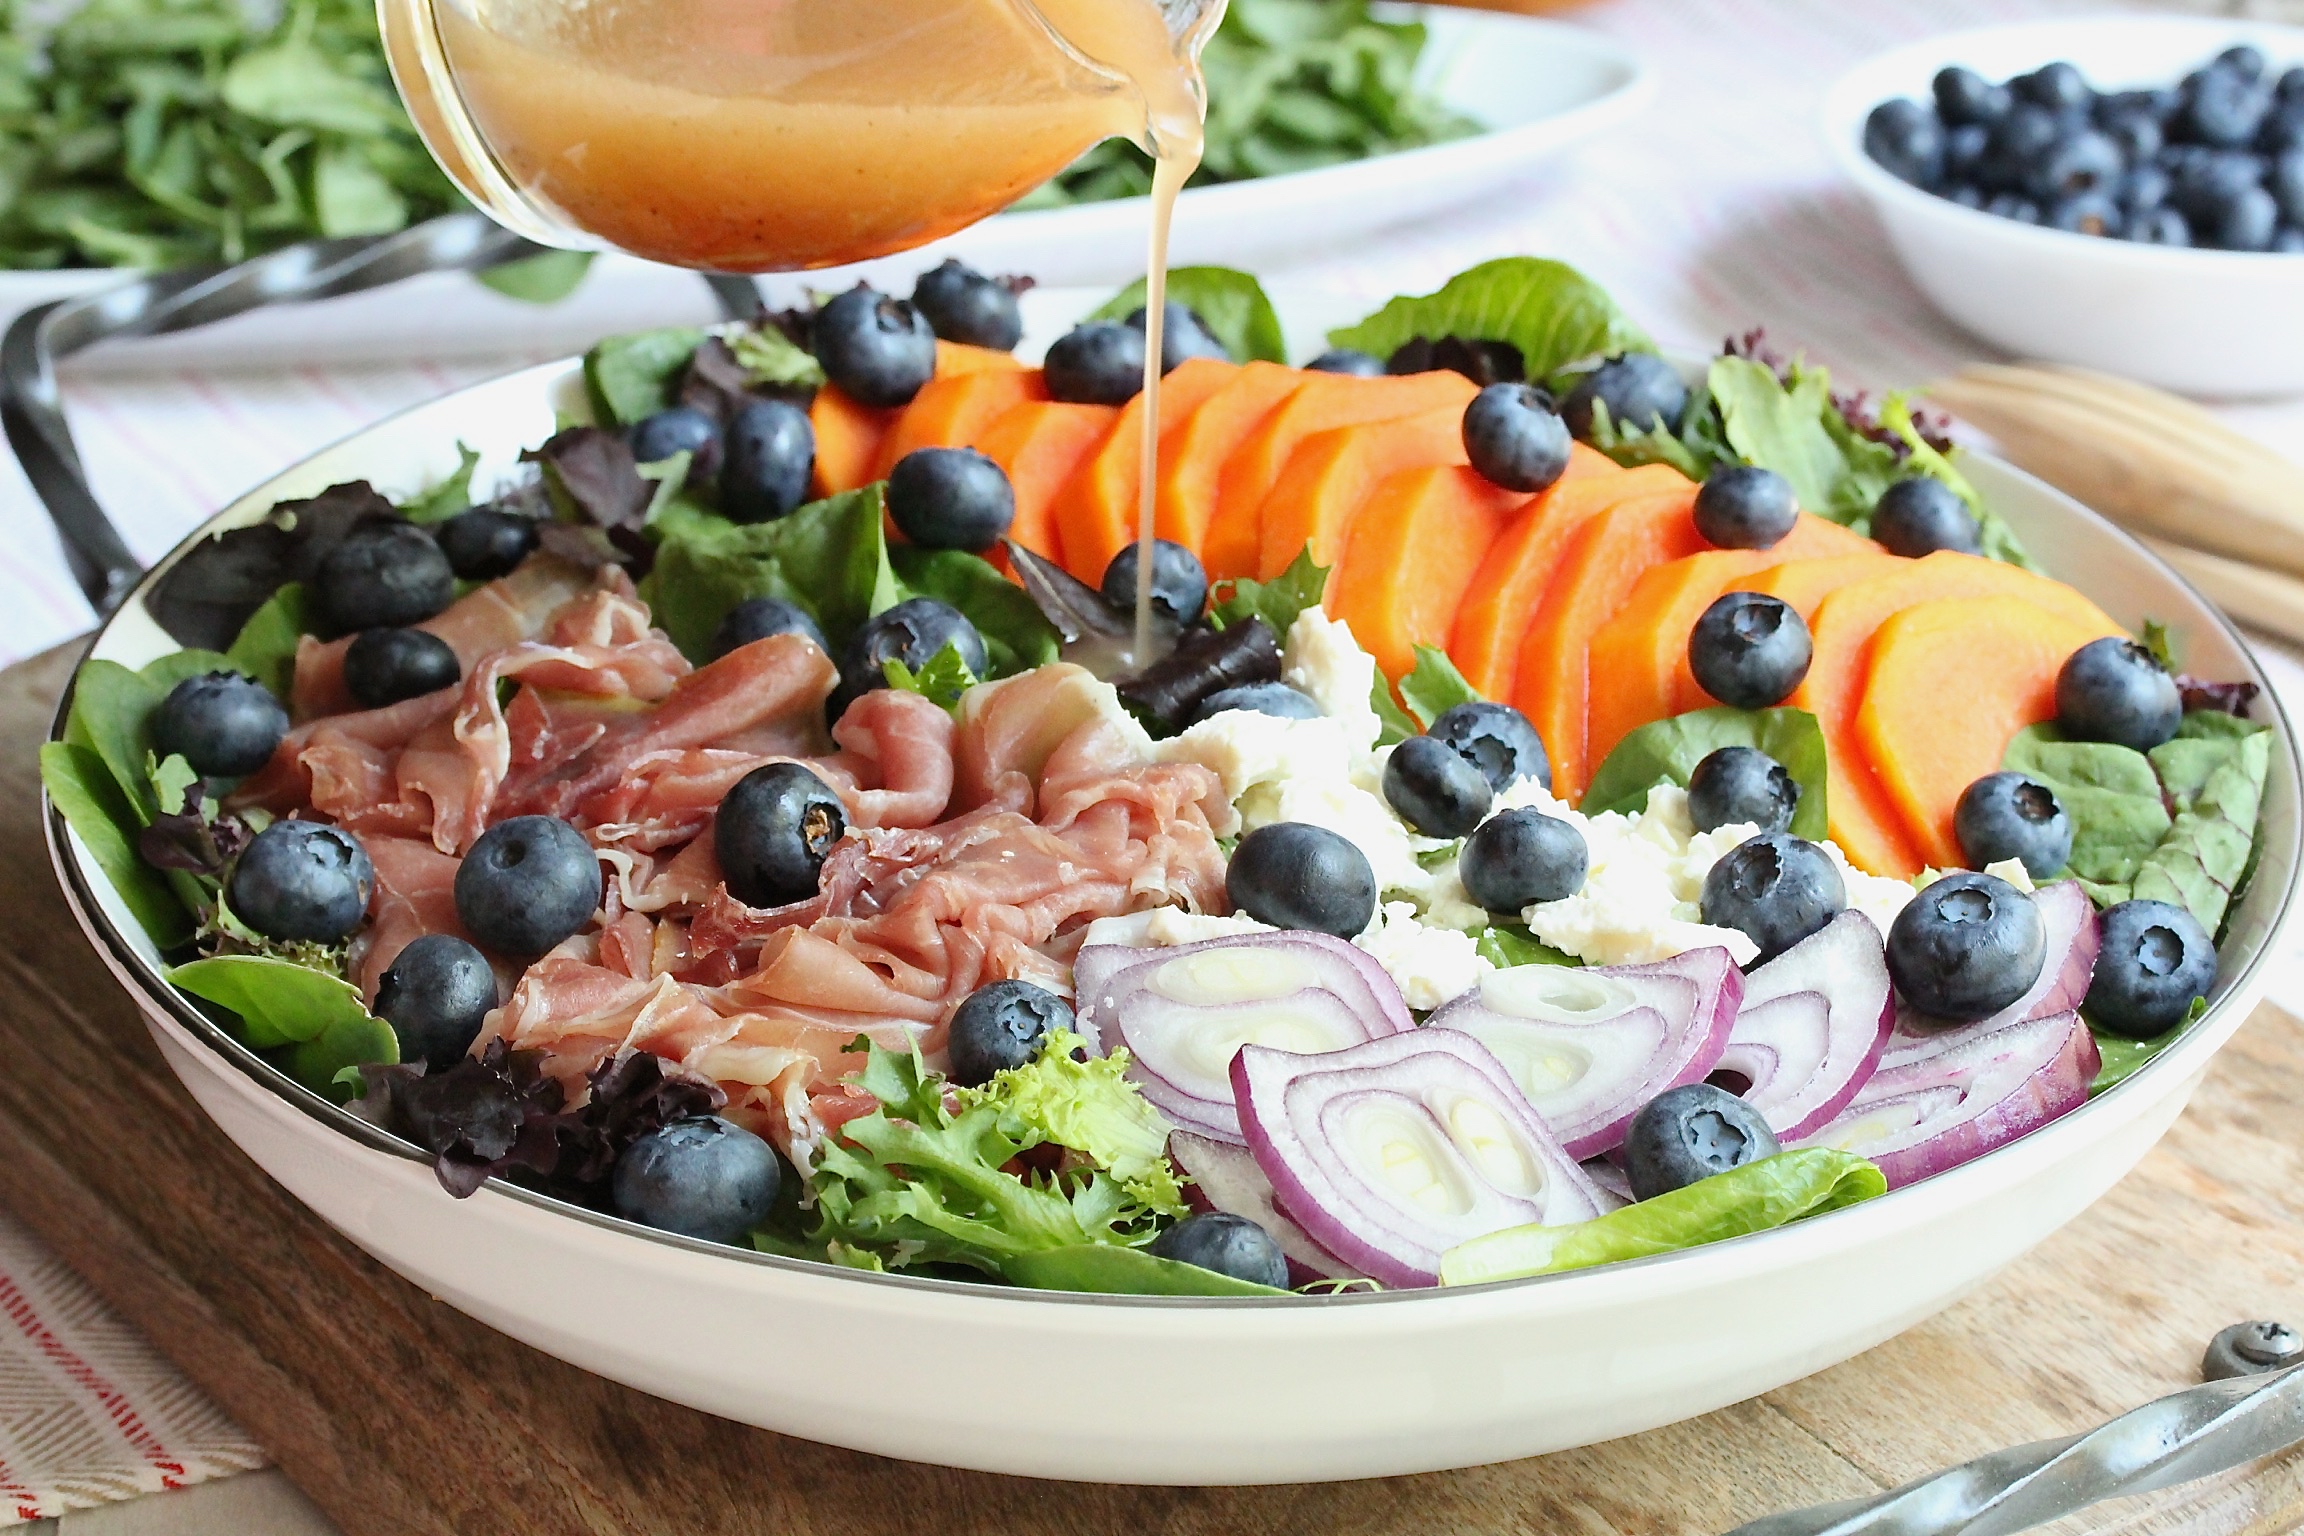 Papaya Prosciutto and Blueberry Salad with Maple Syrup Vinaigrette